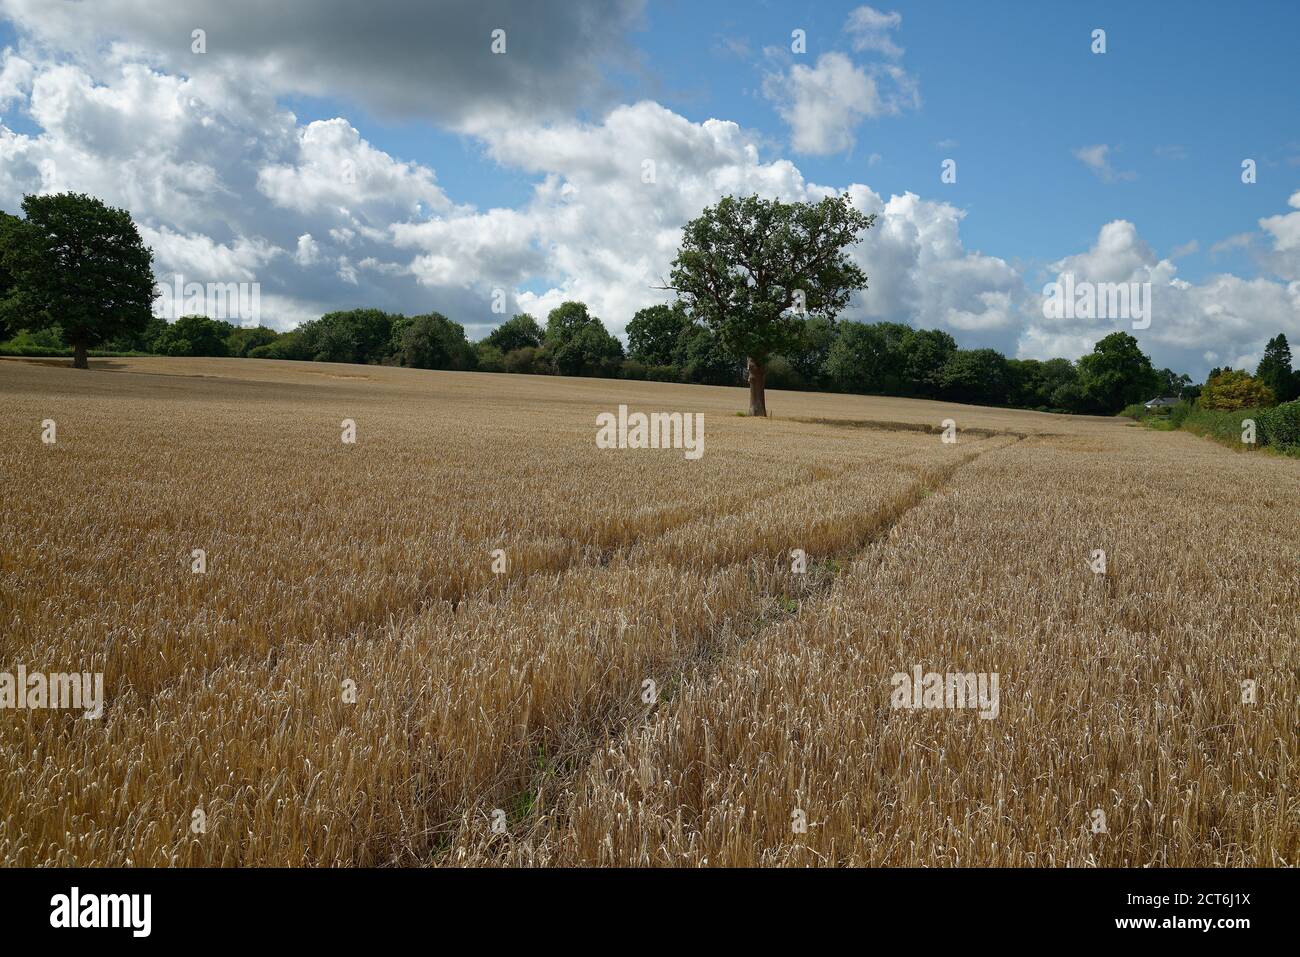 A cereal crop field of Barley waiting for harvest. Dry mature crop in late summer. Stock Photo